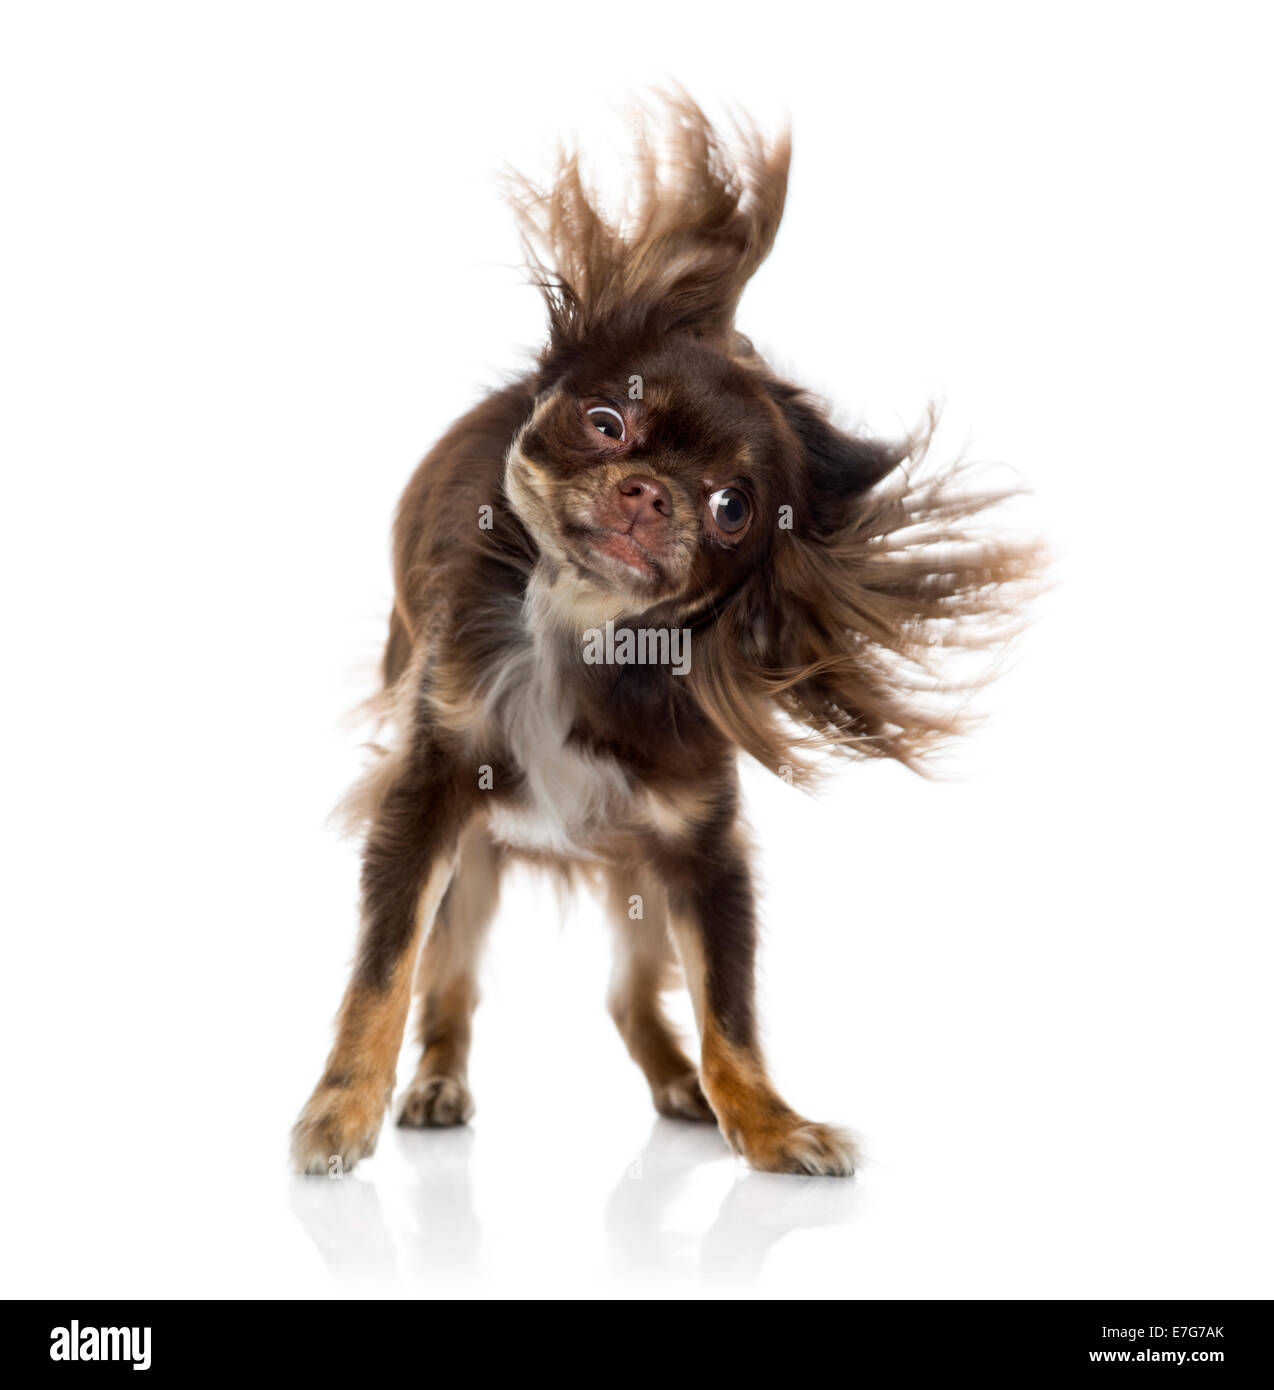 Chihuahua shaking itself shaking against a white background Stock Photo